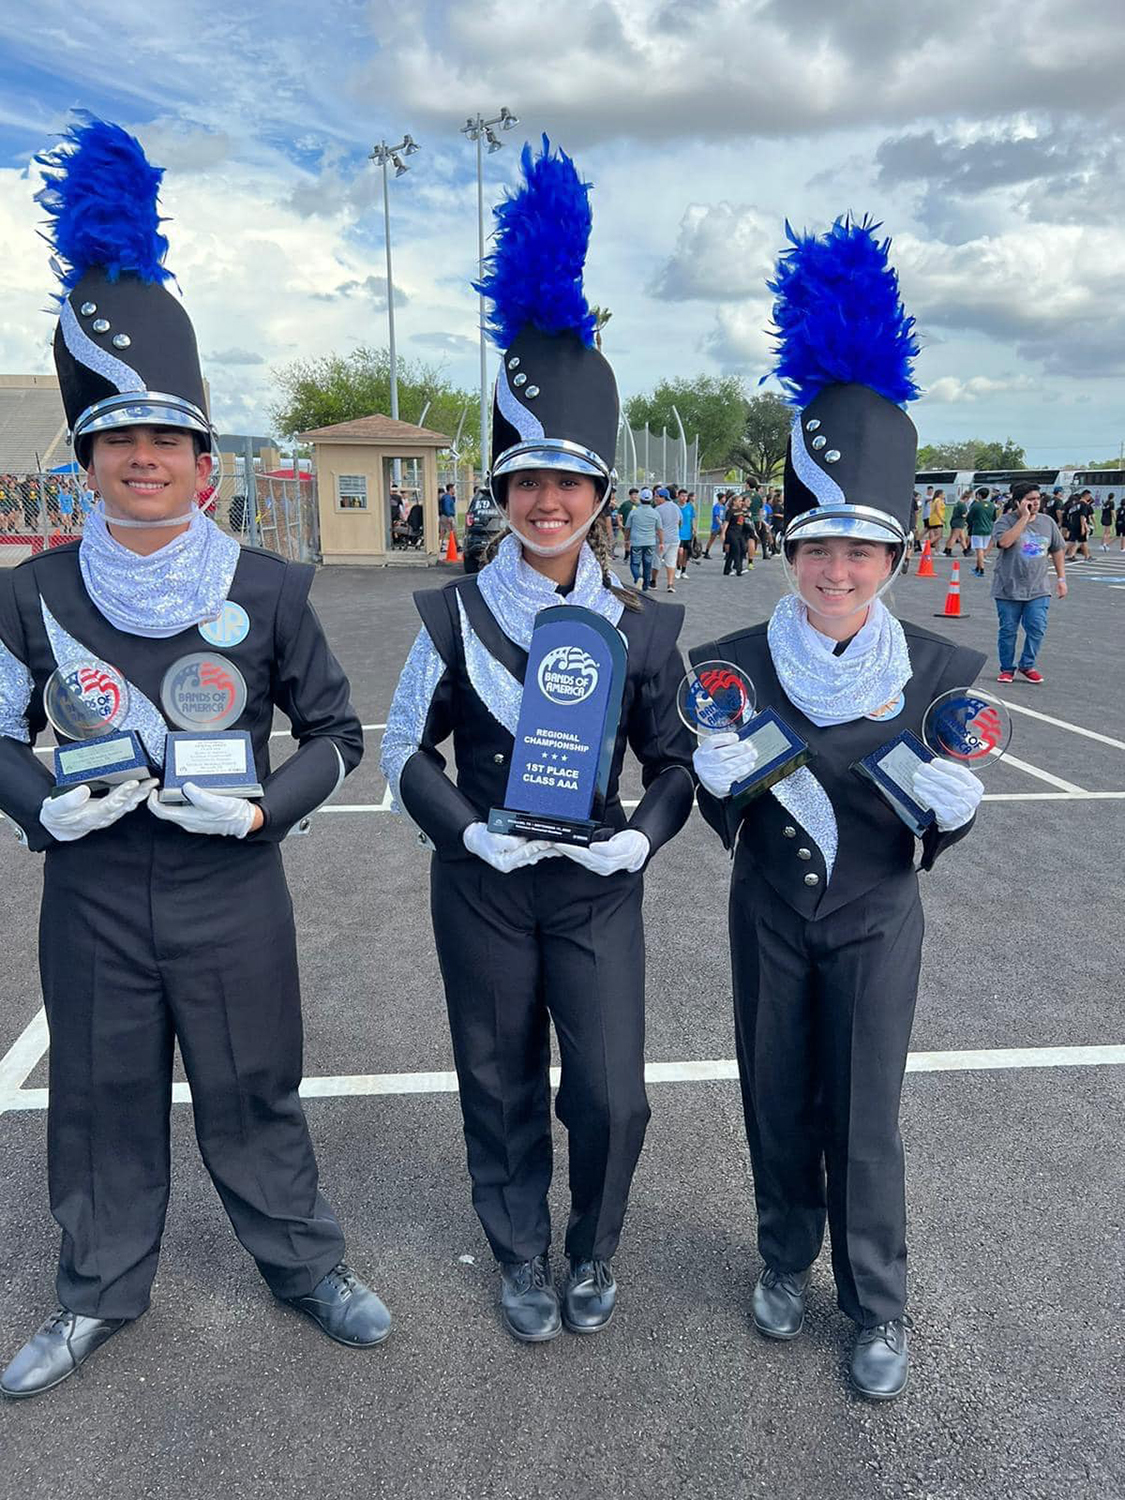 NEWS - Mighty Ram Band excels at Bands of America contest in - 830Times